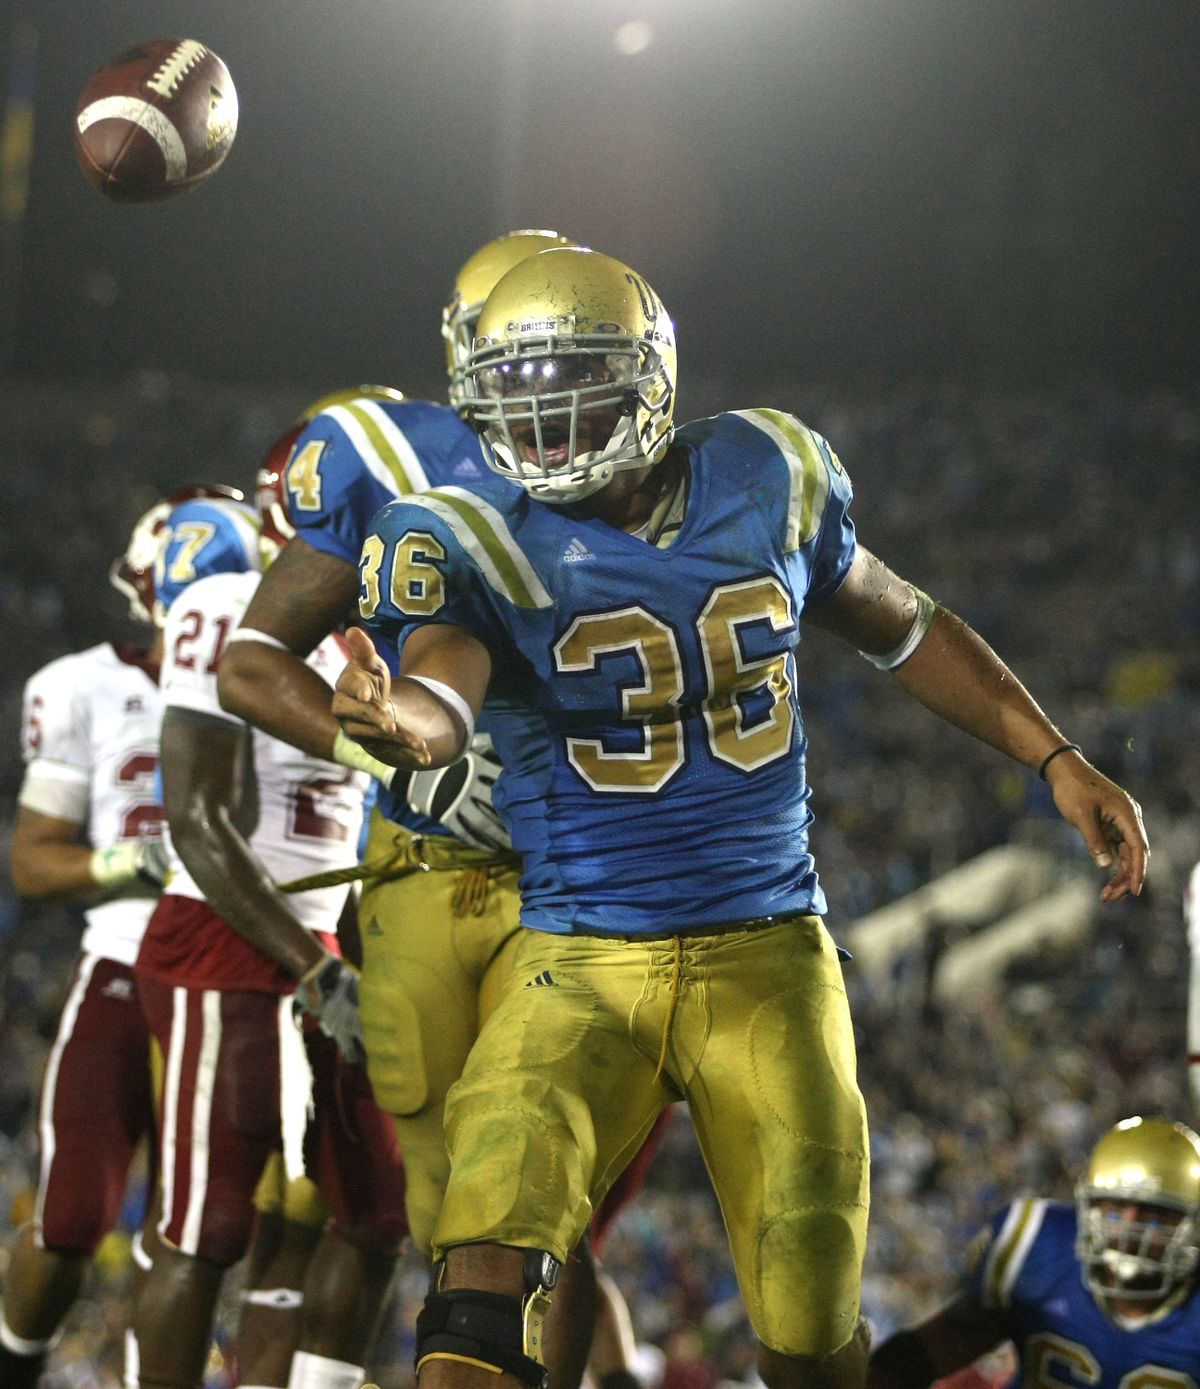 UCLA’s Kahlil Bell celebrates after scoring against WSU. Before Saturday, UCLA had lost six of seven to WSU. (Associated Press / The Spokesman-Review)